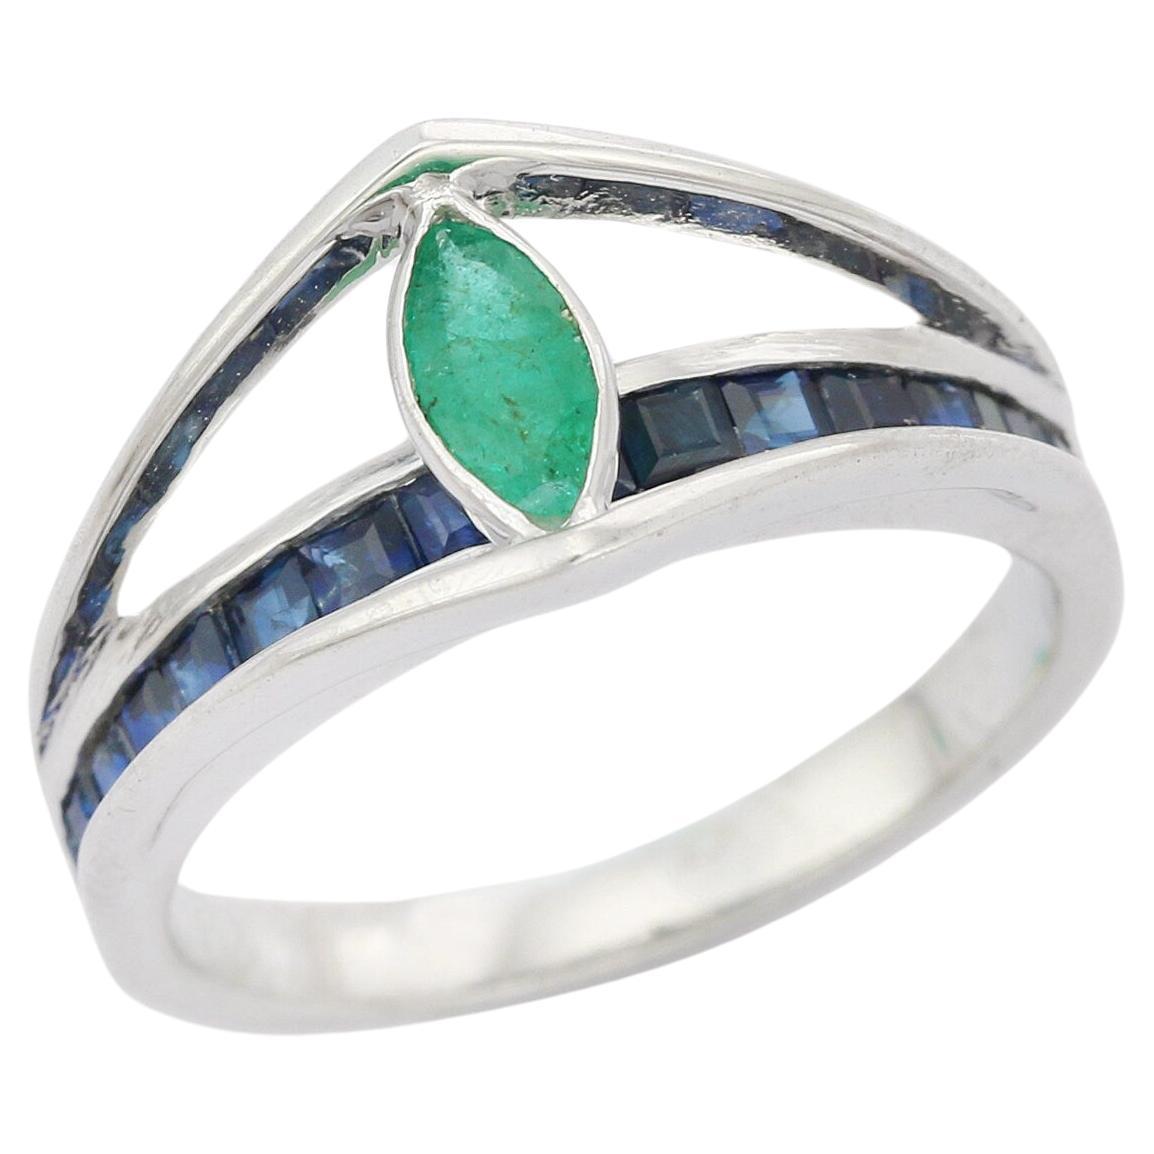 For Sale:  925 Sterling Silver Natural Emerald and Sapphire Ring, Christmas Gifts